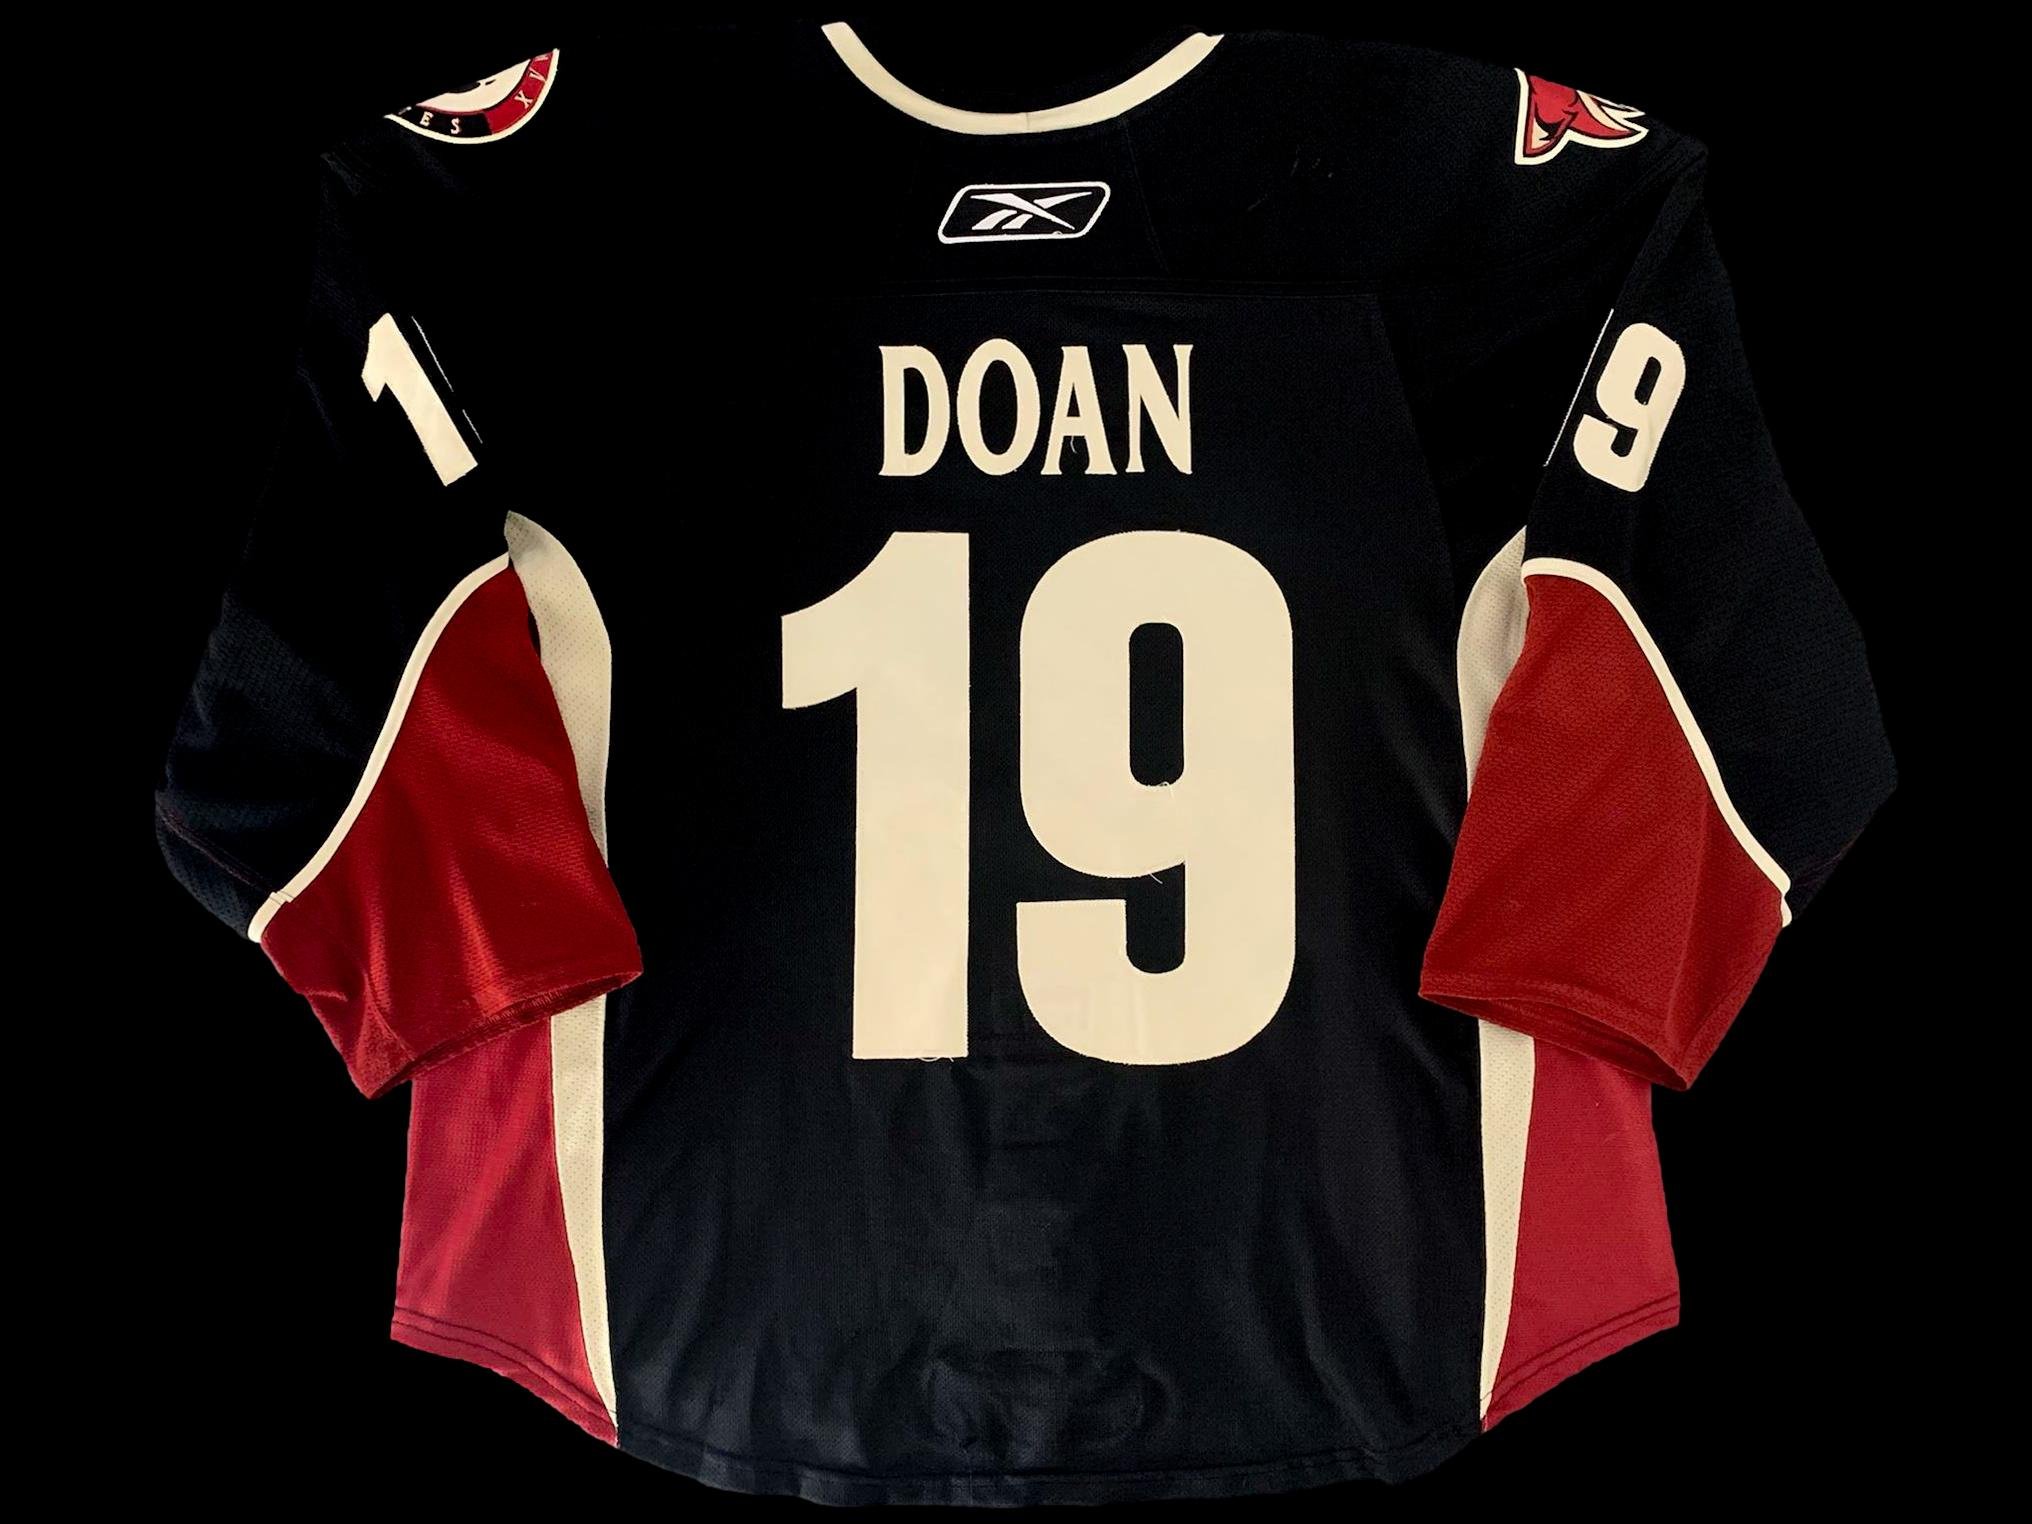 coyotes game worn jersey